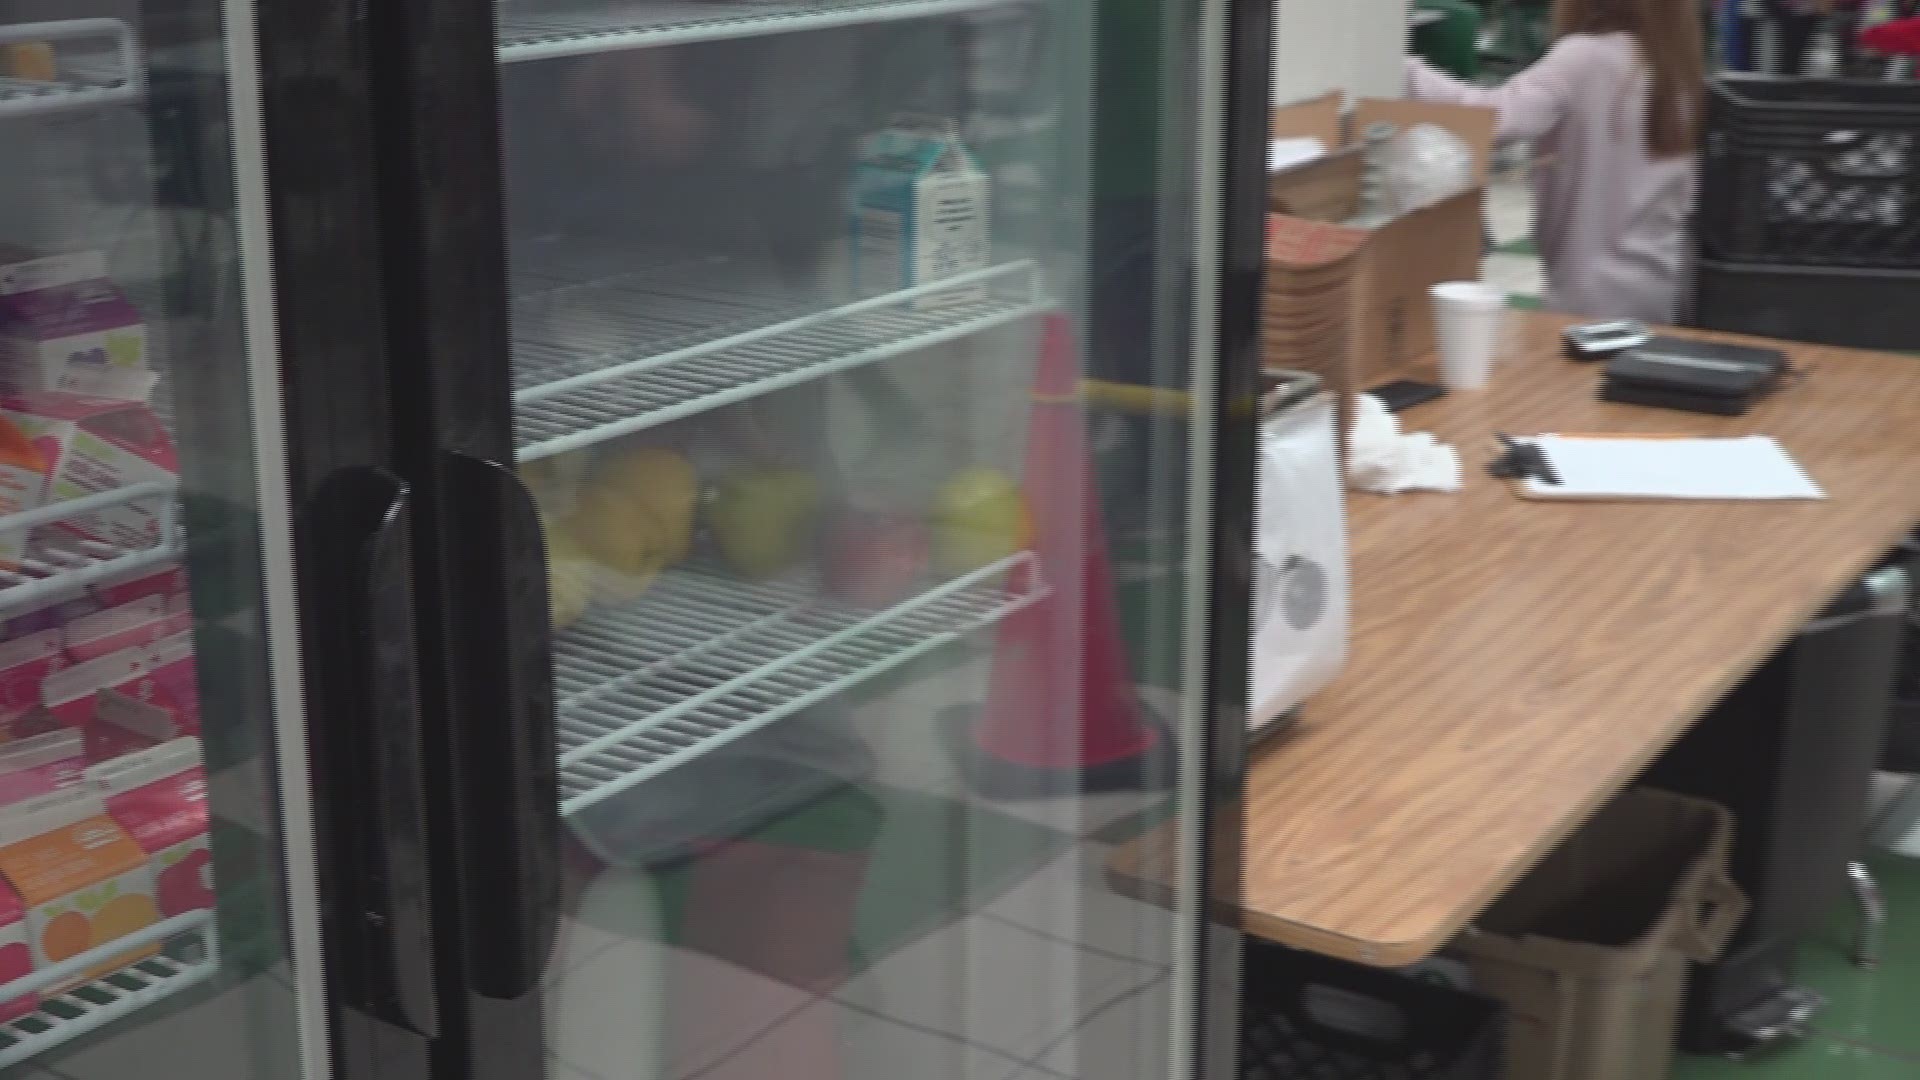 With the Gwinnett County School meal service ending on May 15, the county is stepping in to make sure children are fed during the summer.